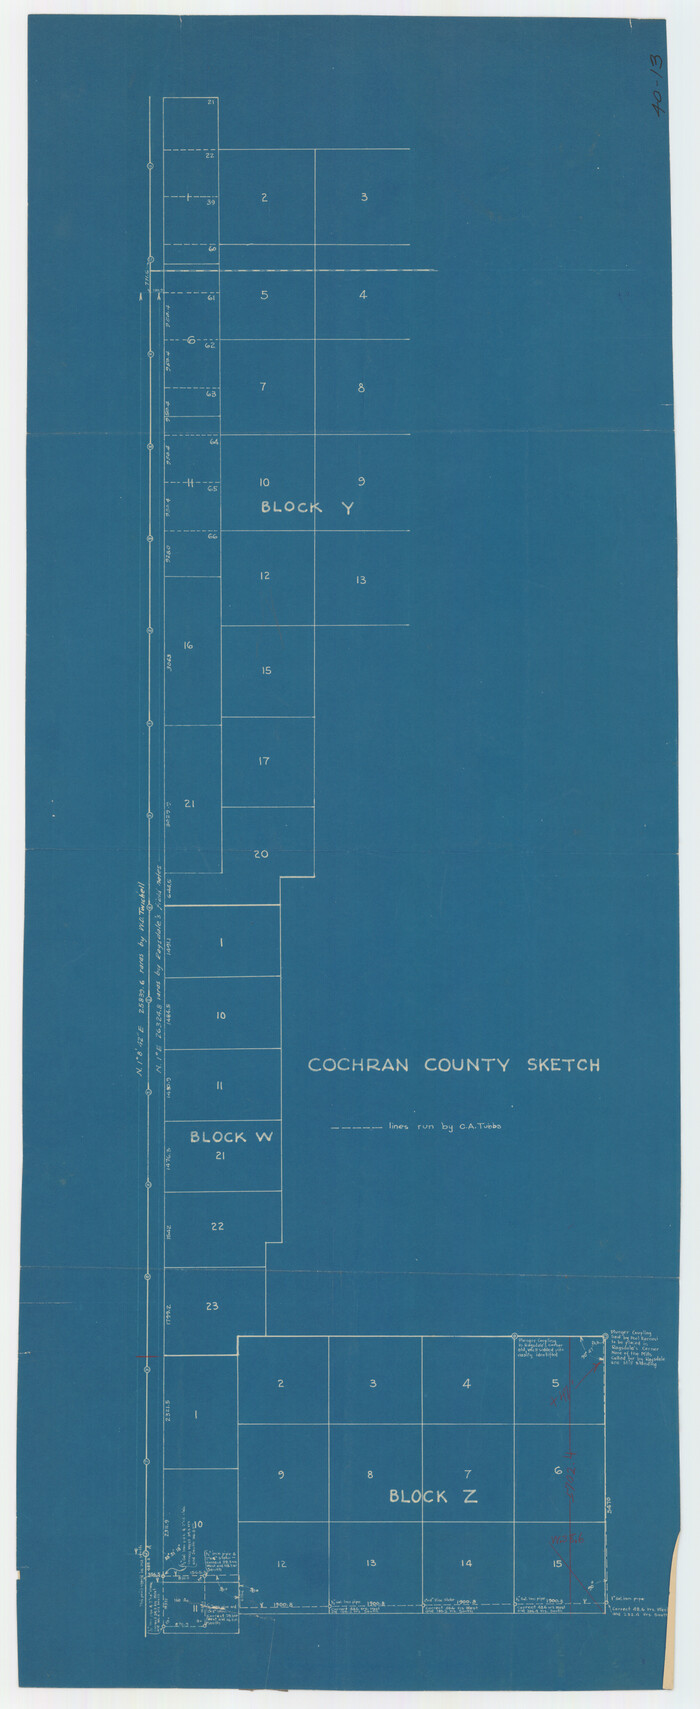 90443, Cochran County Sketch [showing lines run by C. A. Tubbs], Twichell Survey Records